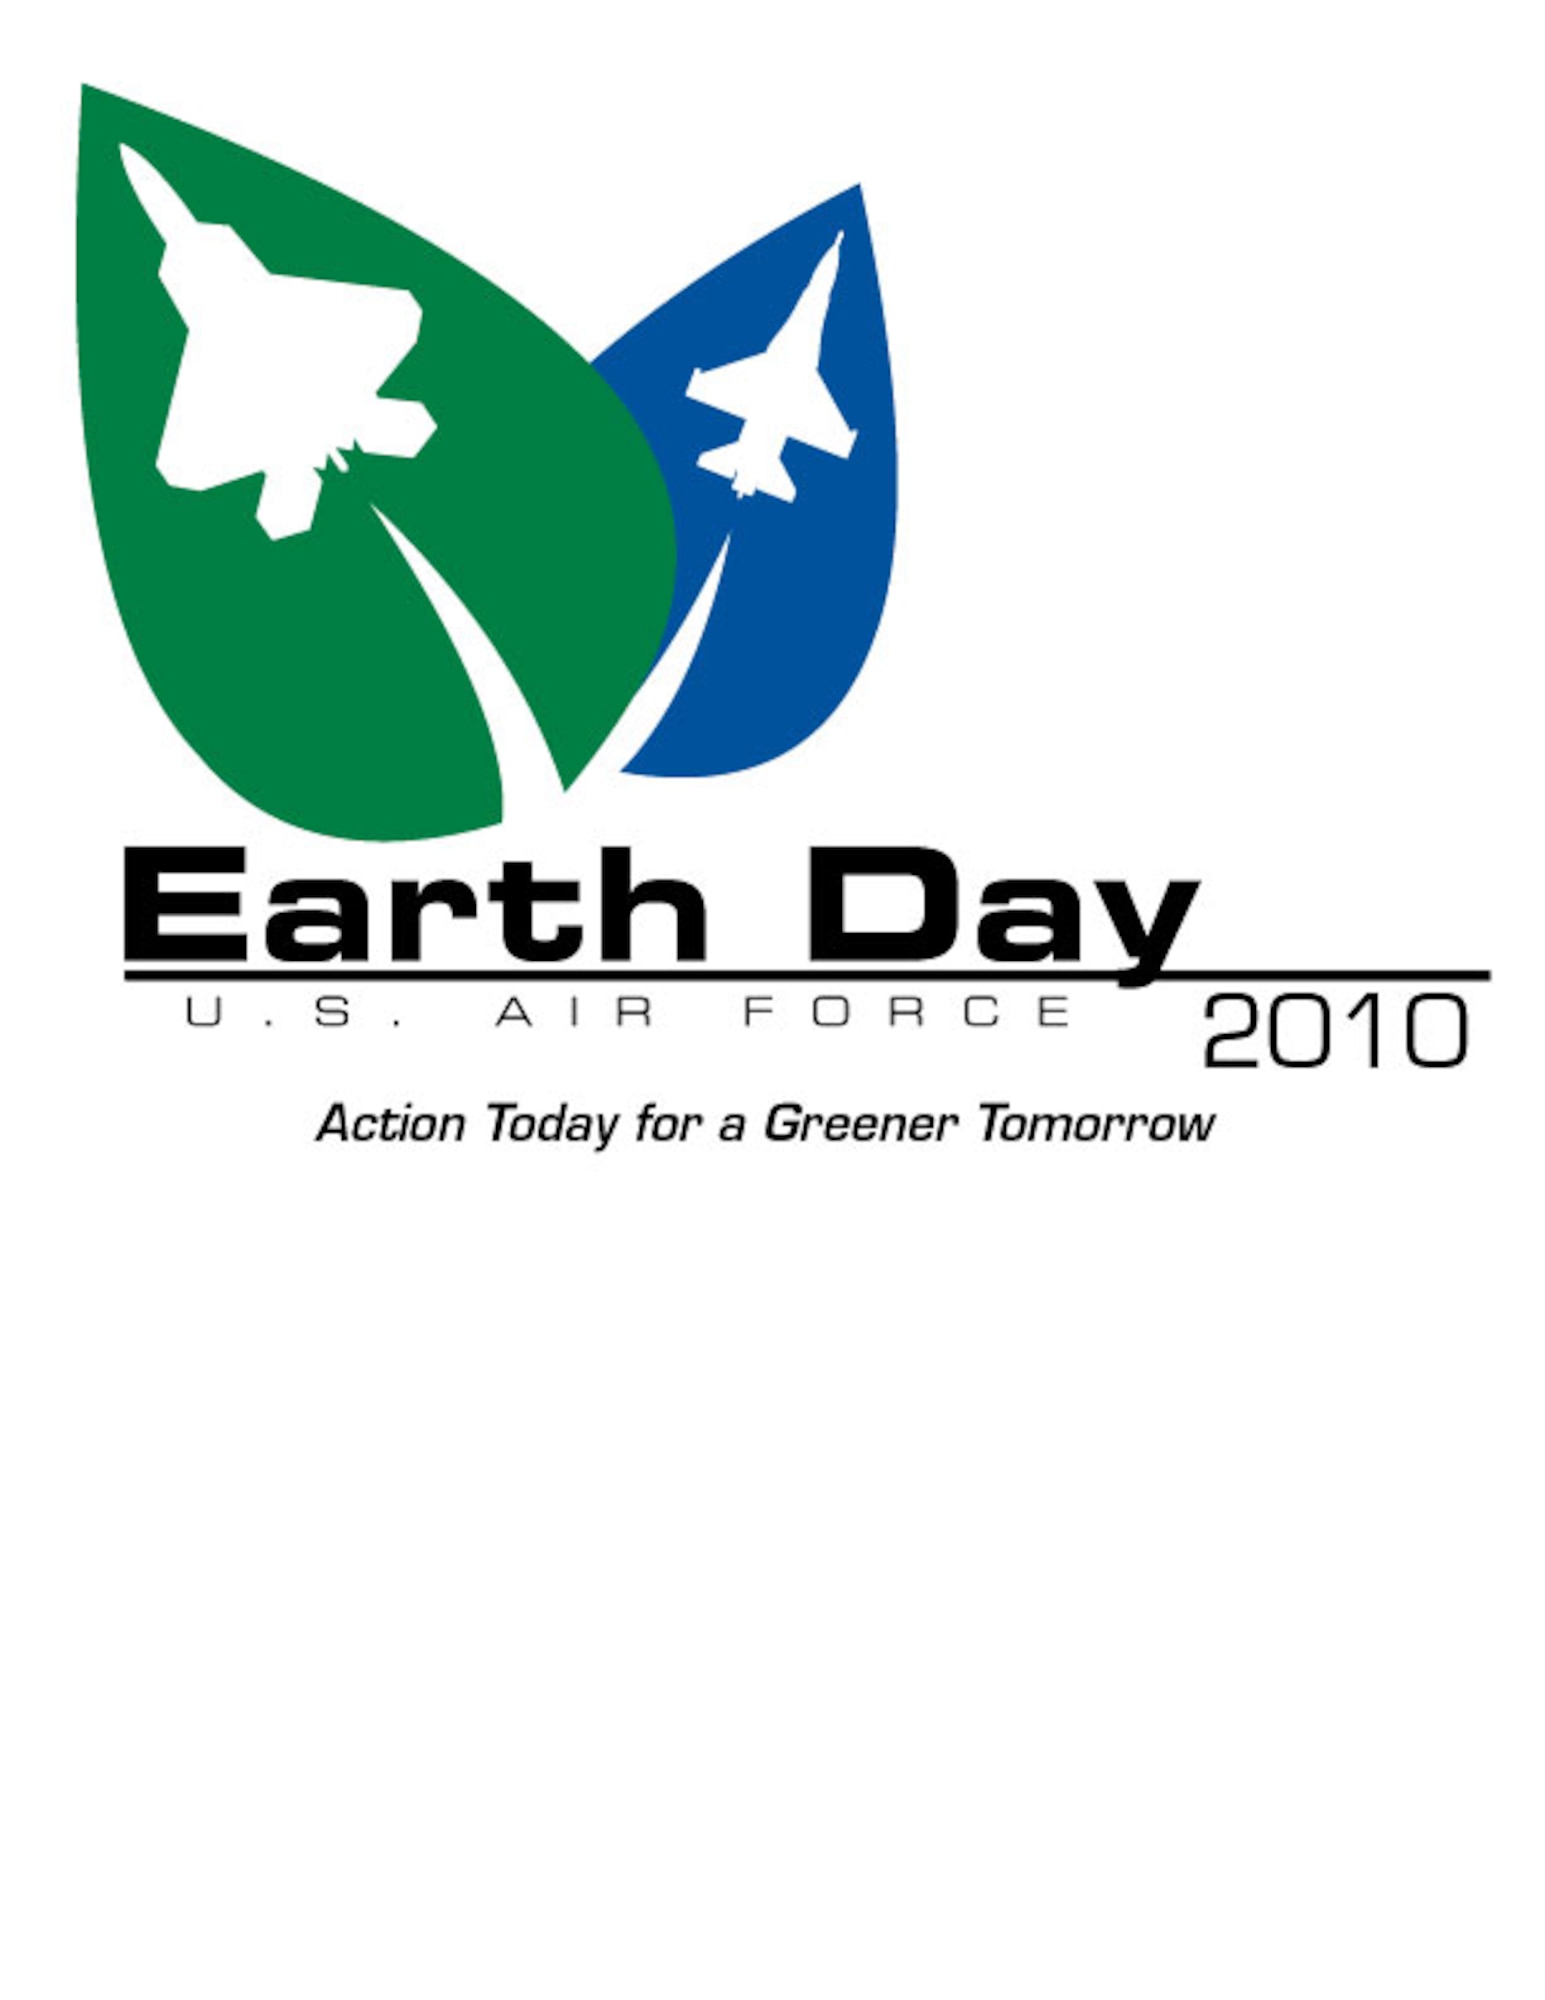 Air Force observes Earth Day 2010
